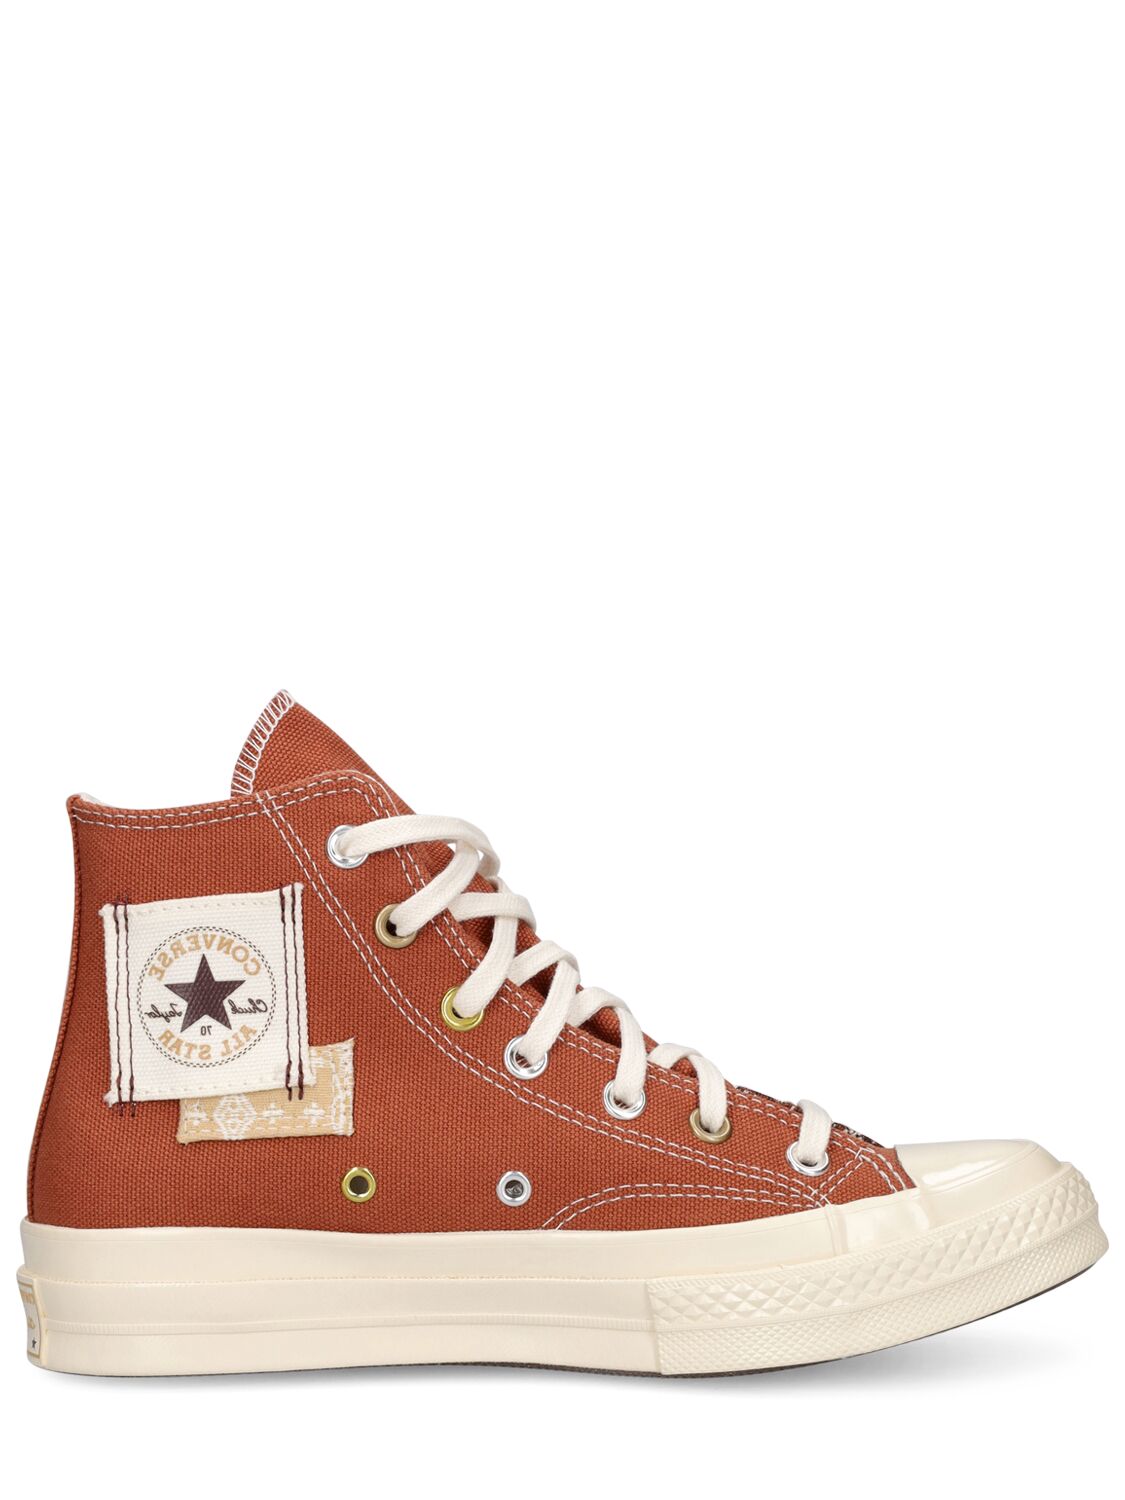 Image of Chuck 70 Patchwork High Sneakers